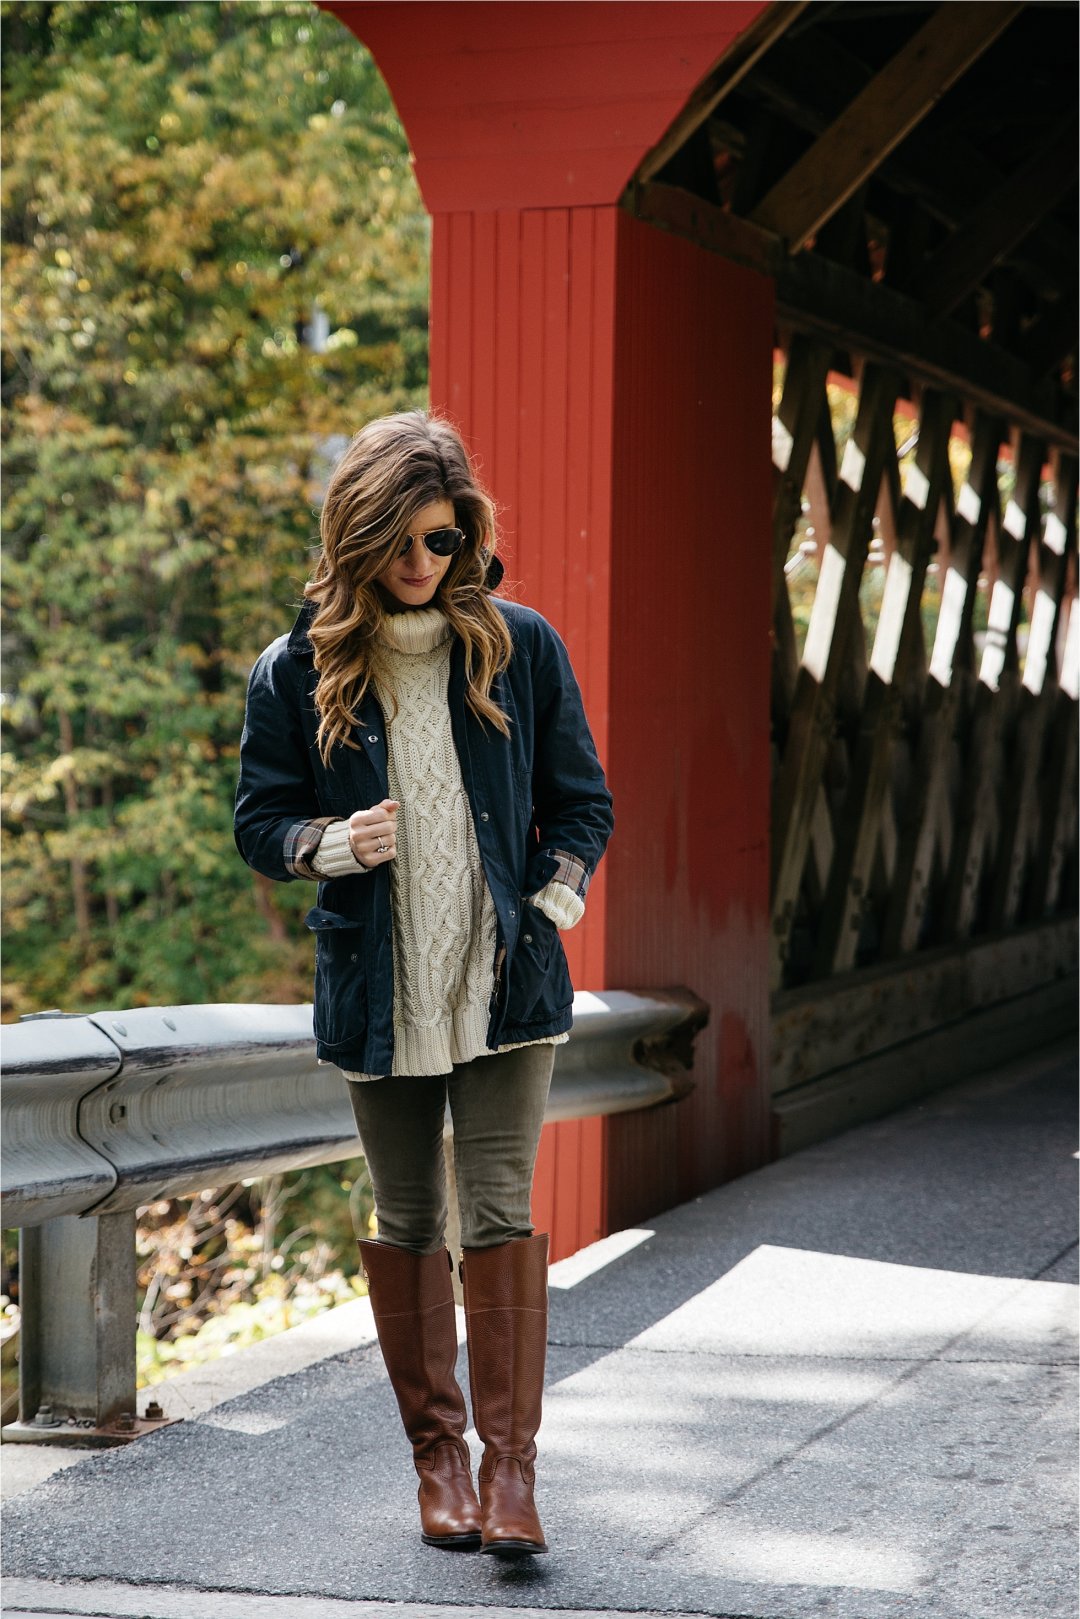 Fall outfit, tory burch riding boots, barbour jacket, olive green pants, oversized cableknit turtleneck sweater